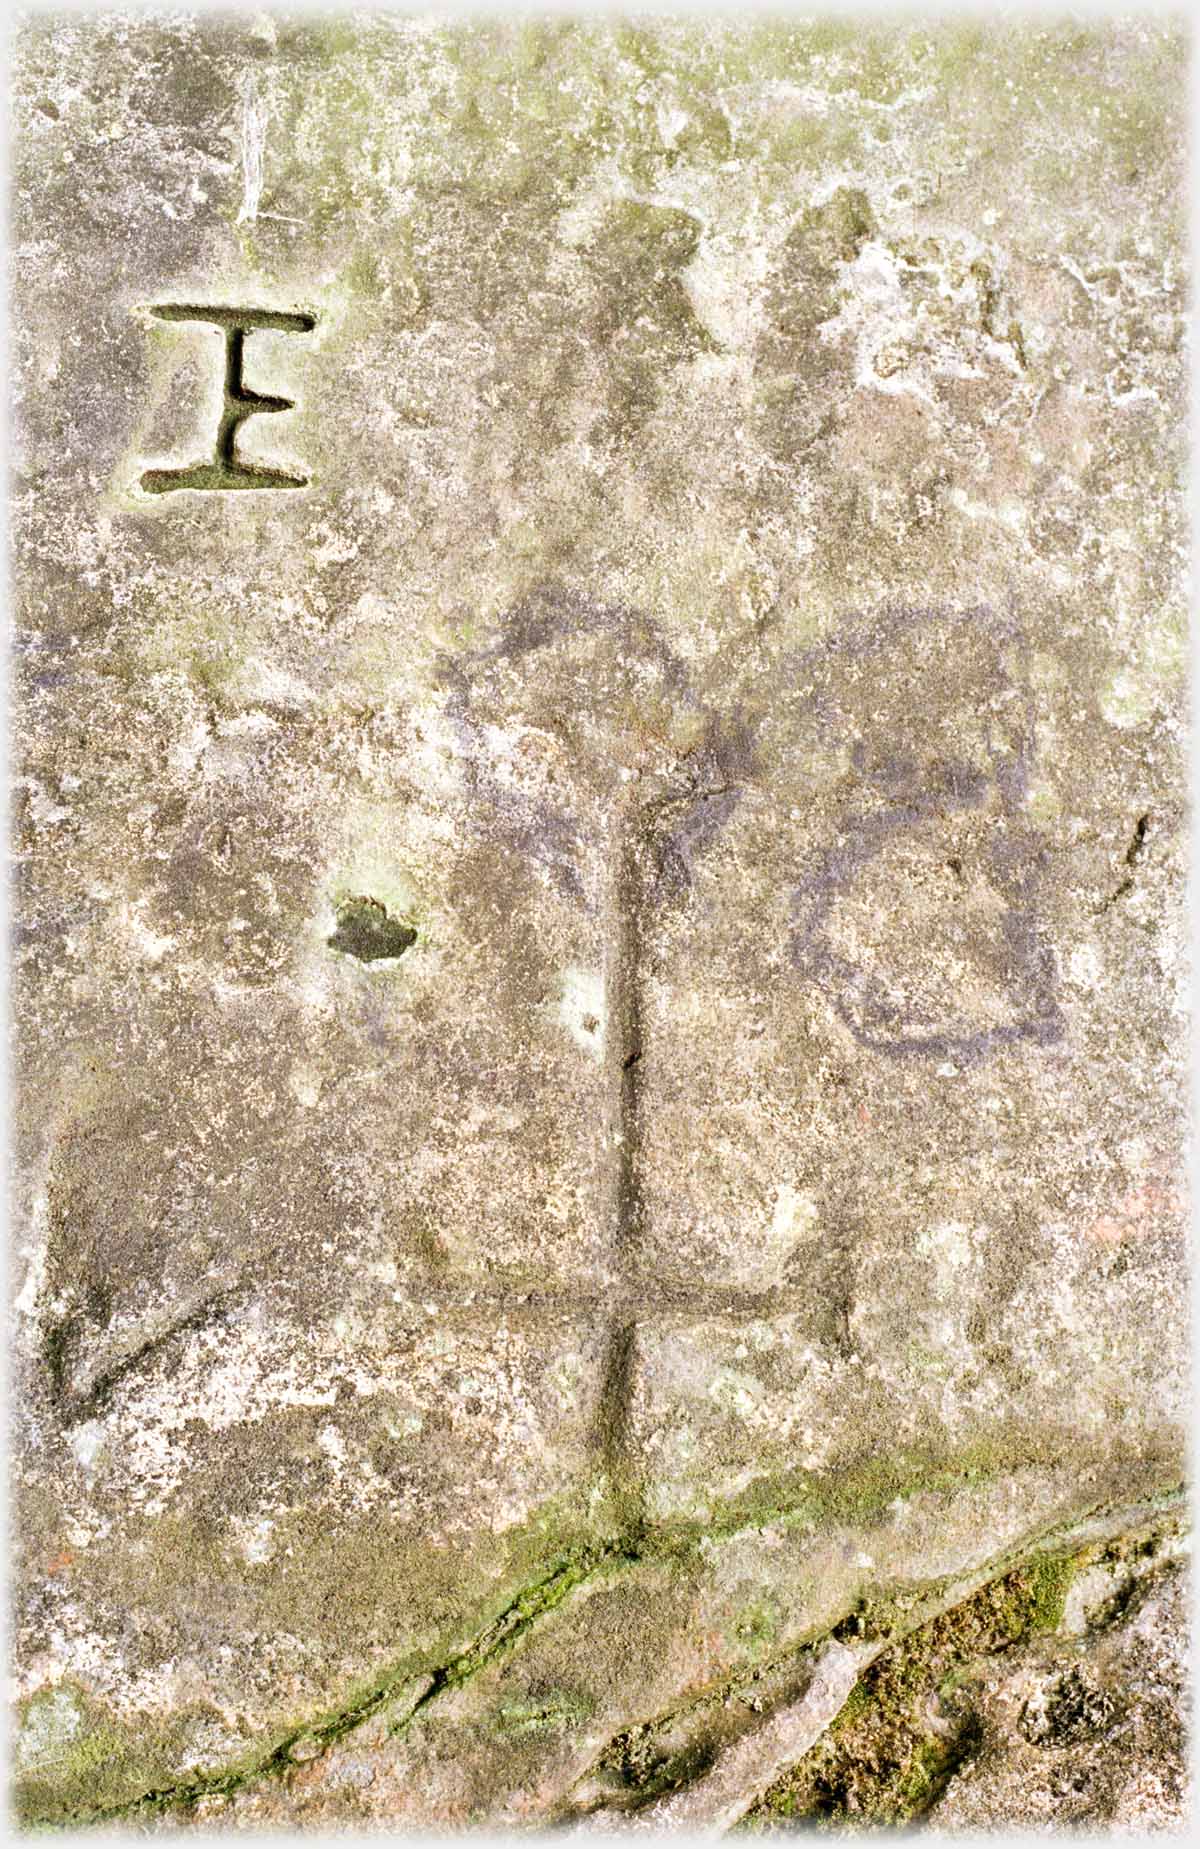 Carvings on stone including crosses.